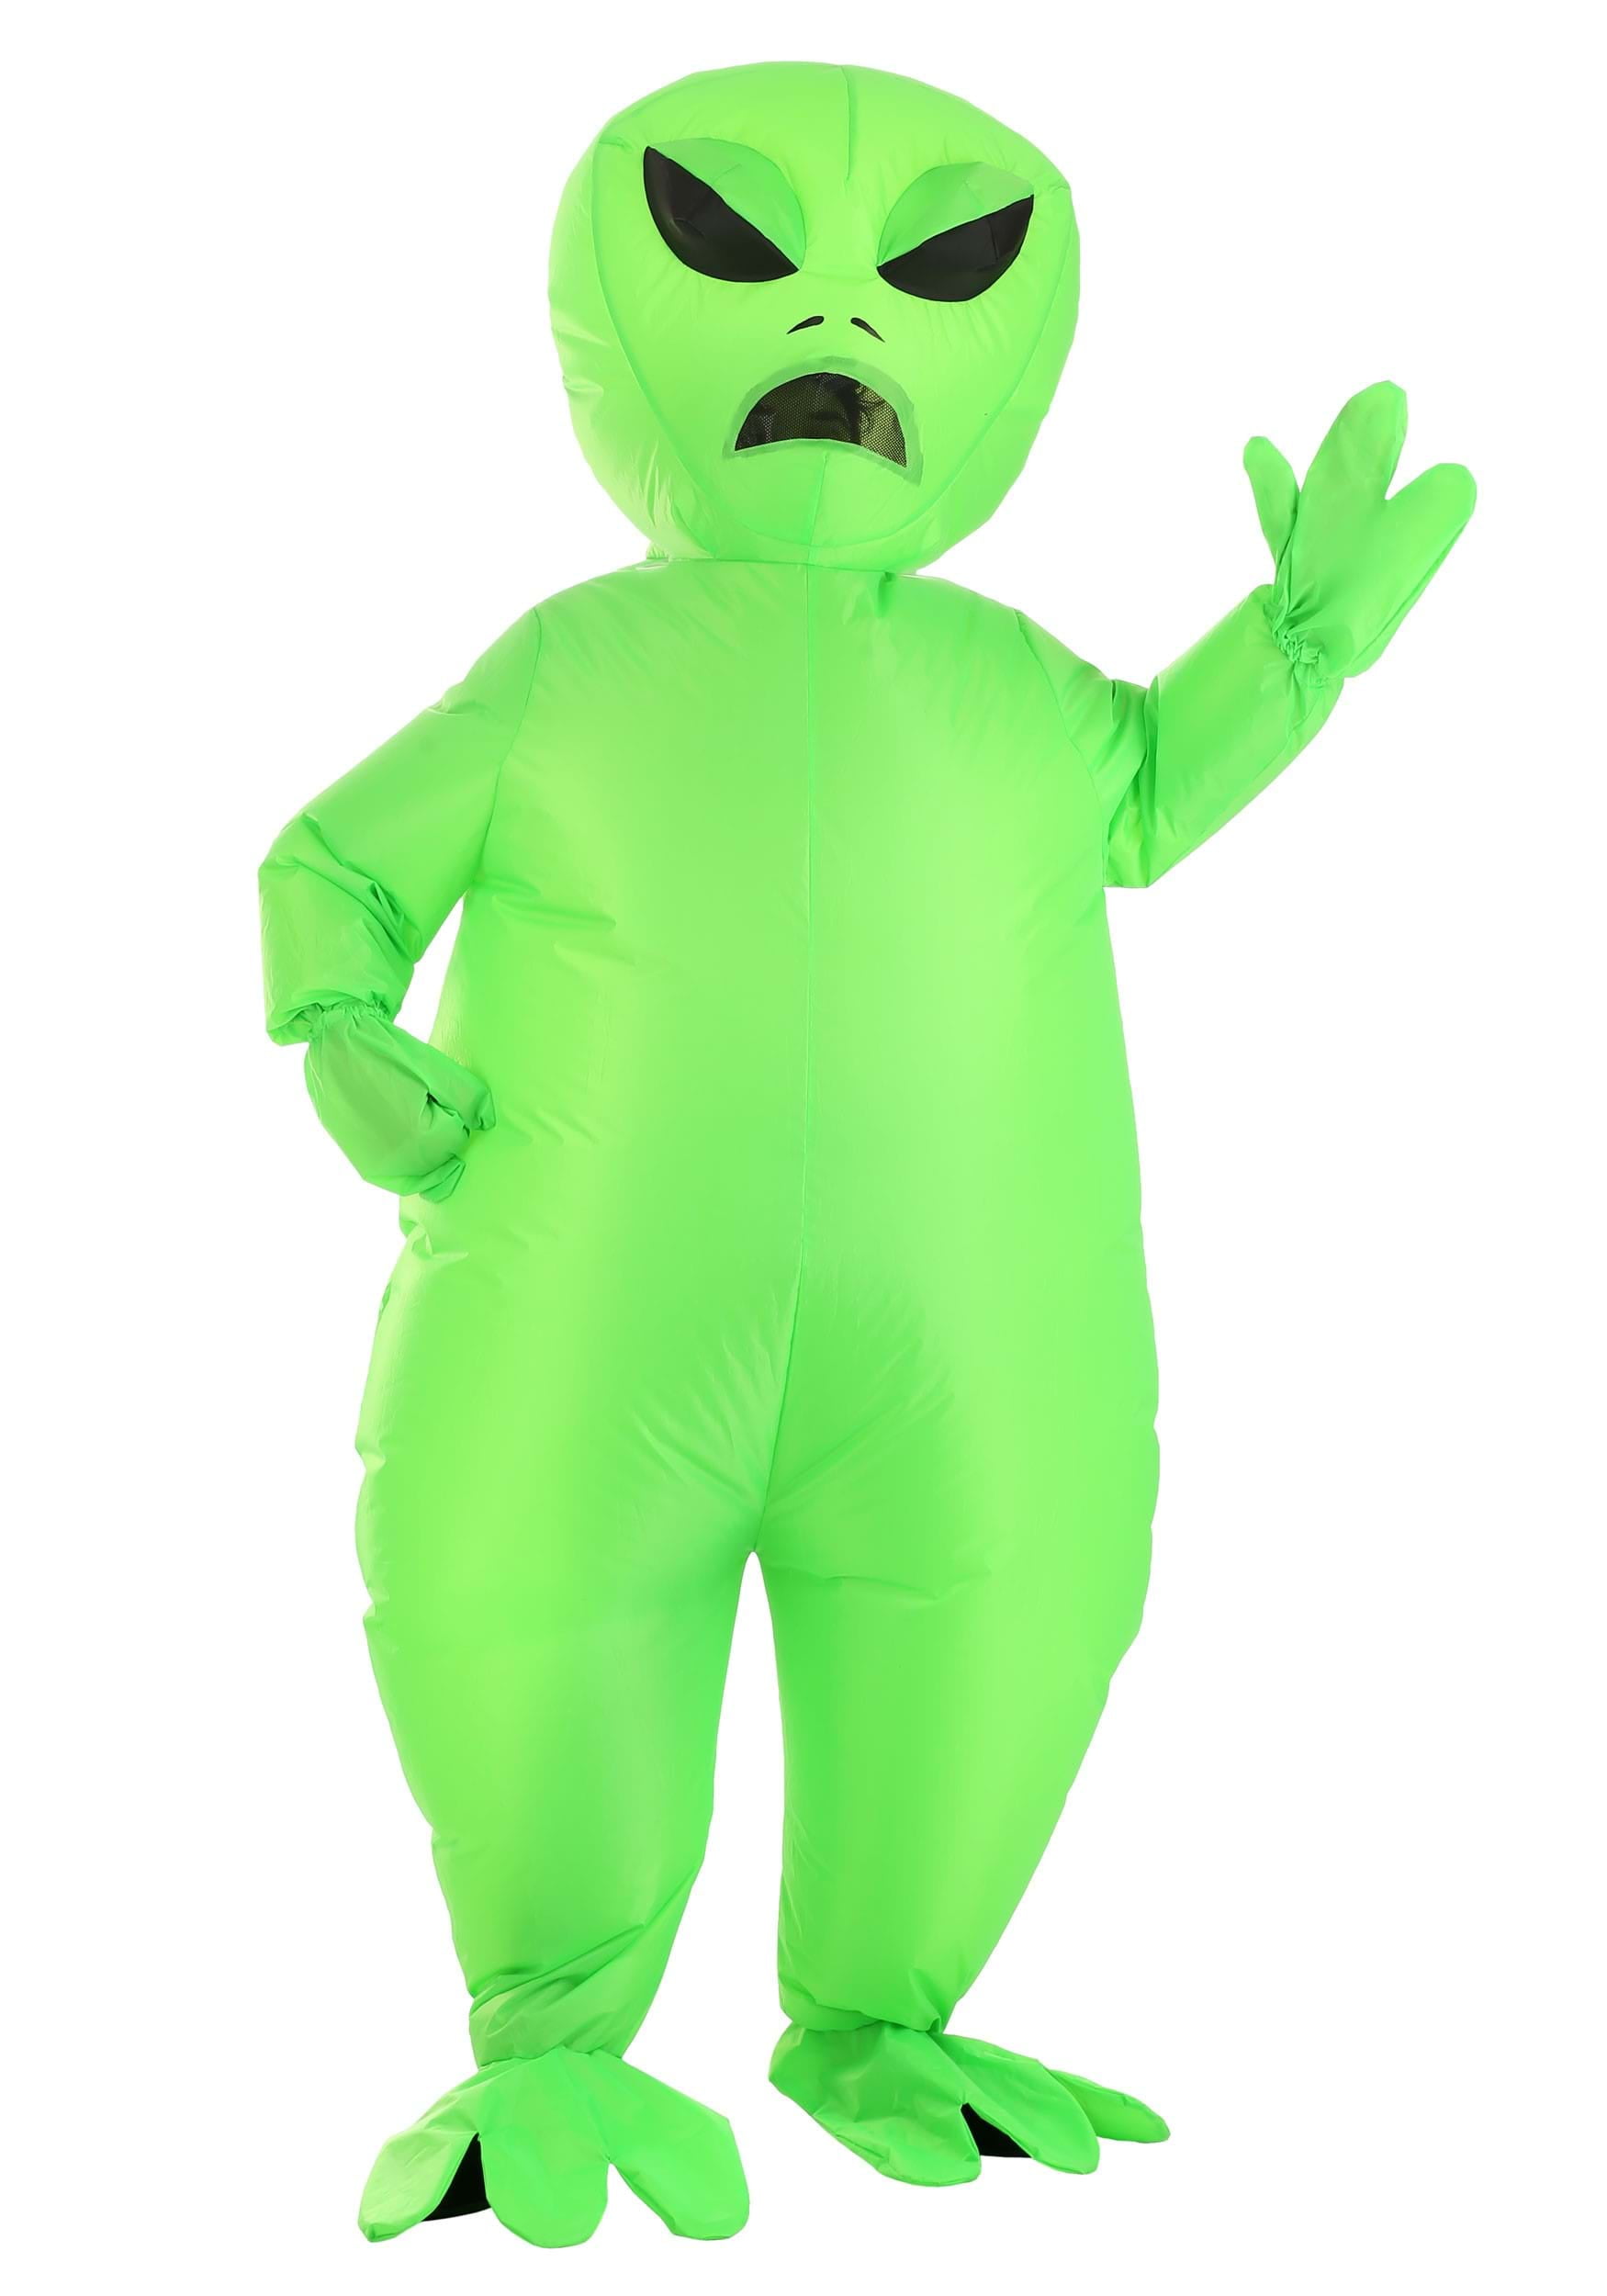 Rubie's Inflatable Full Body Suit Costume Orange One Size for sale online 